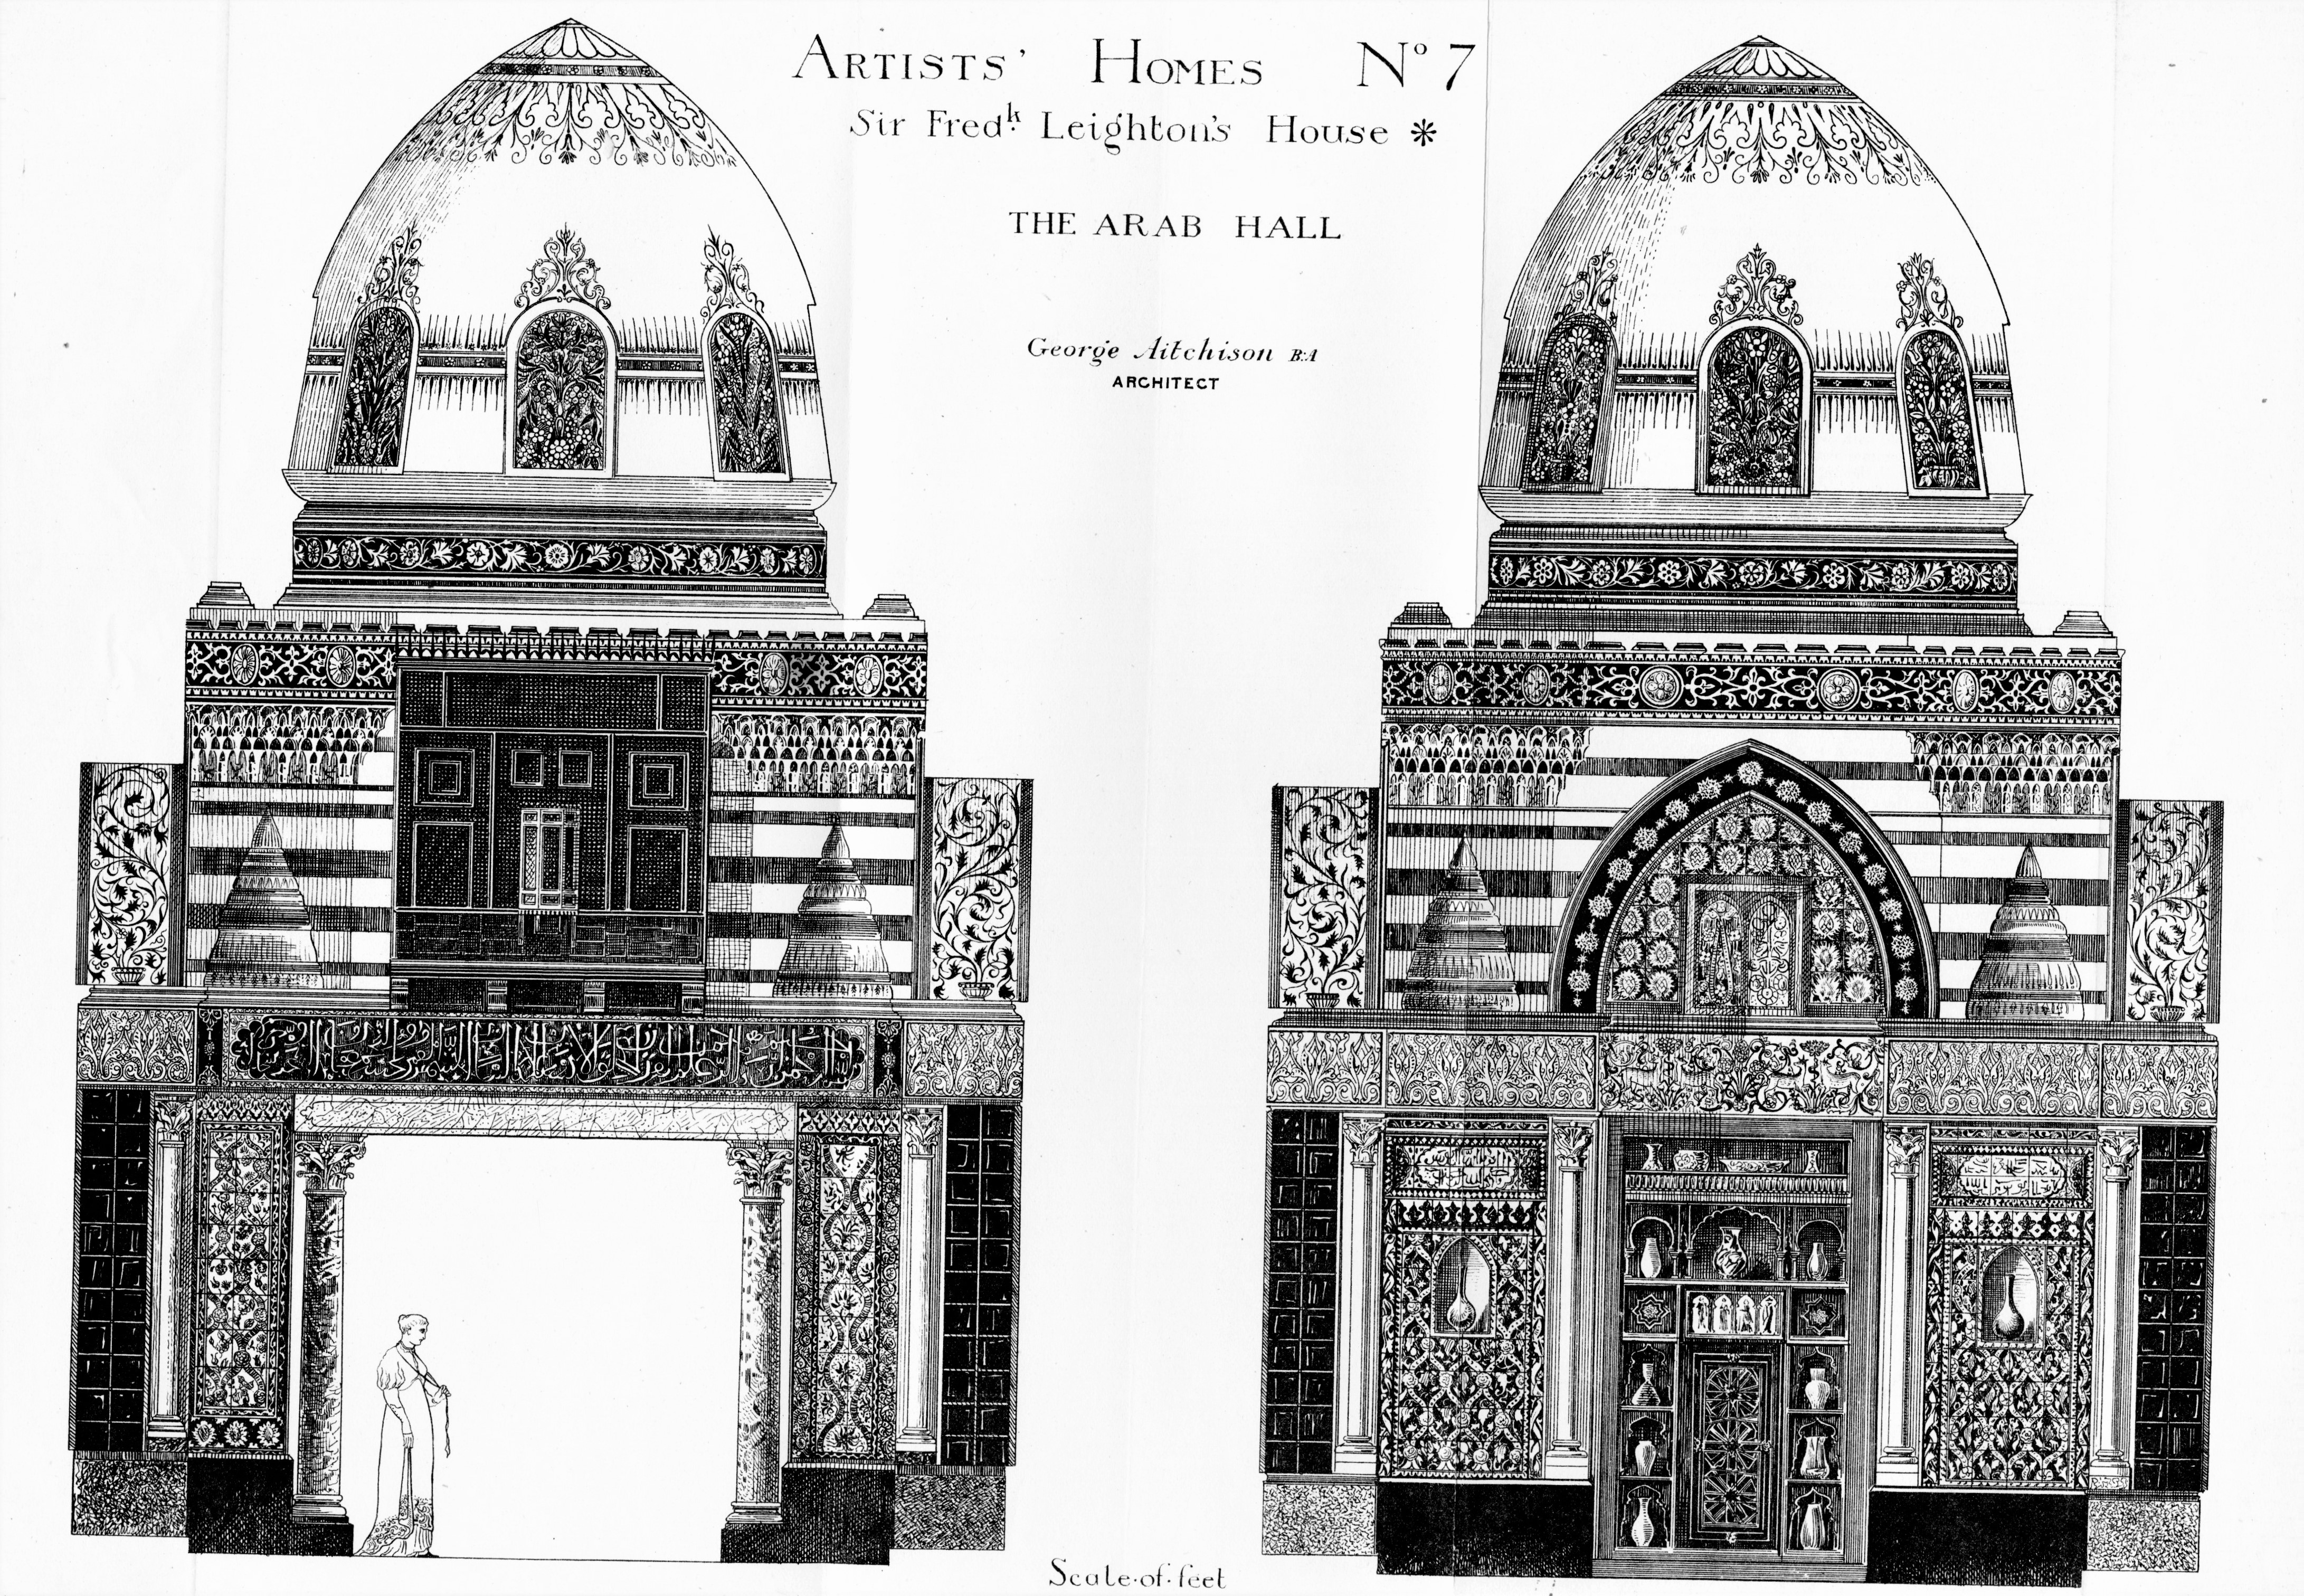 George Aitchison design for The Arab Hall at Leighton House, The Building News, 1880